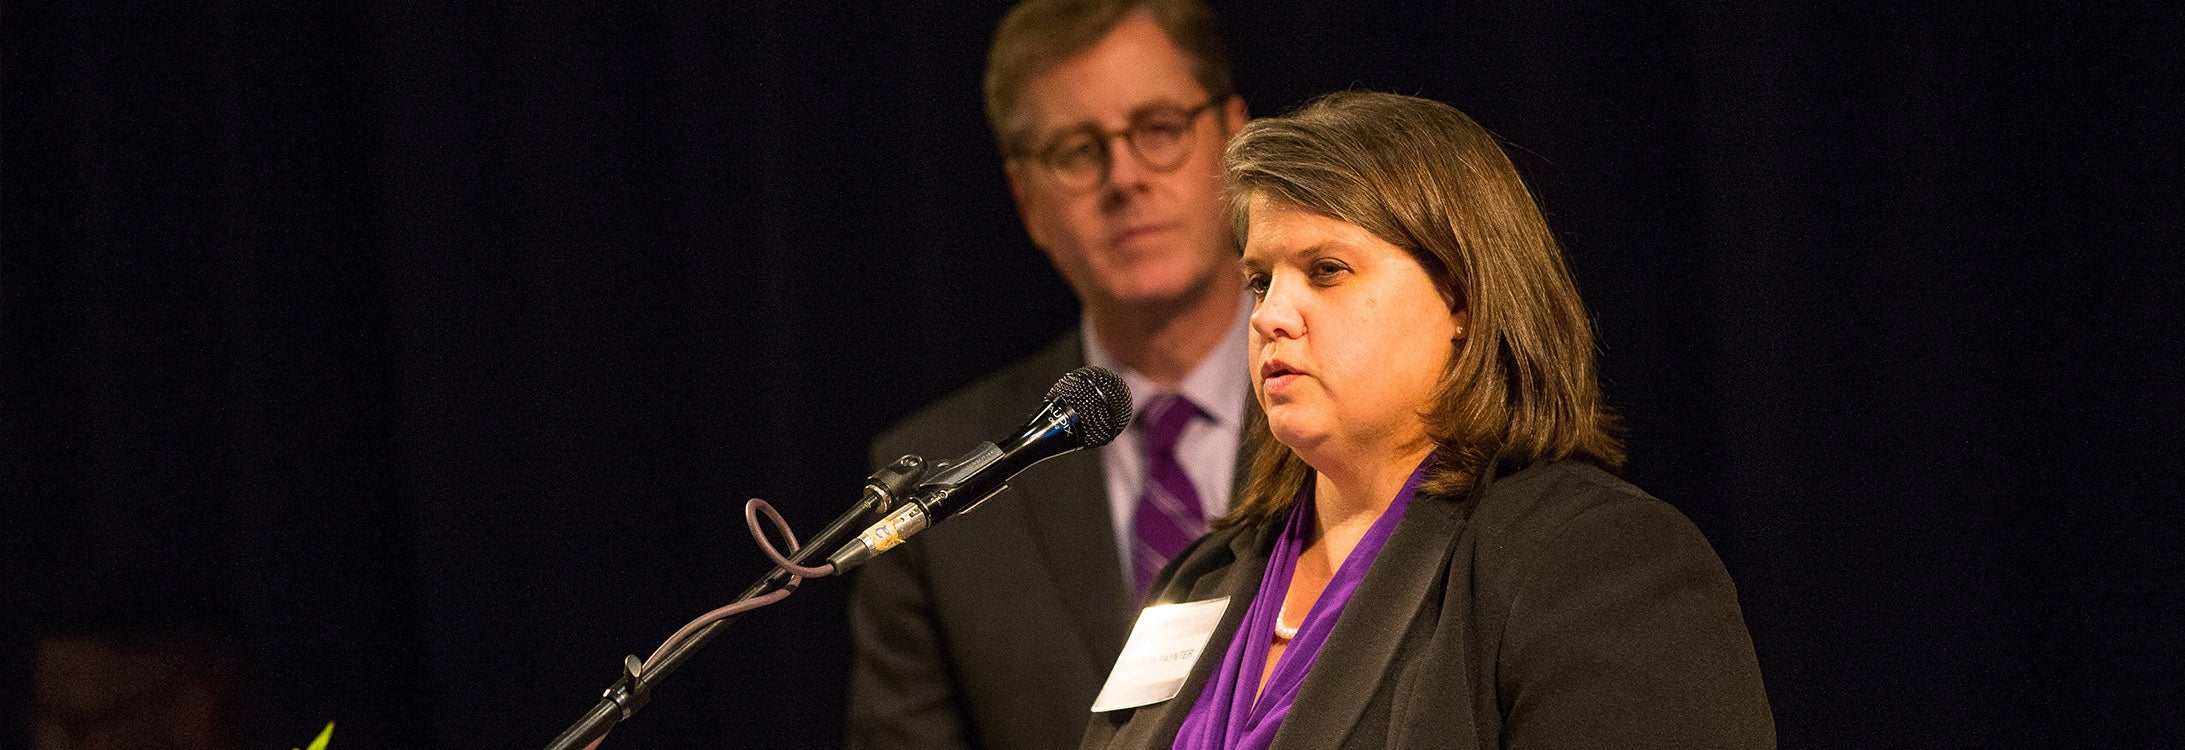 East Carolina University Assistant Vice Chancellor for Community Engagement and Research Sharon Paynter has been named to the Association of Public and Land-Grant Universities executive committee.